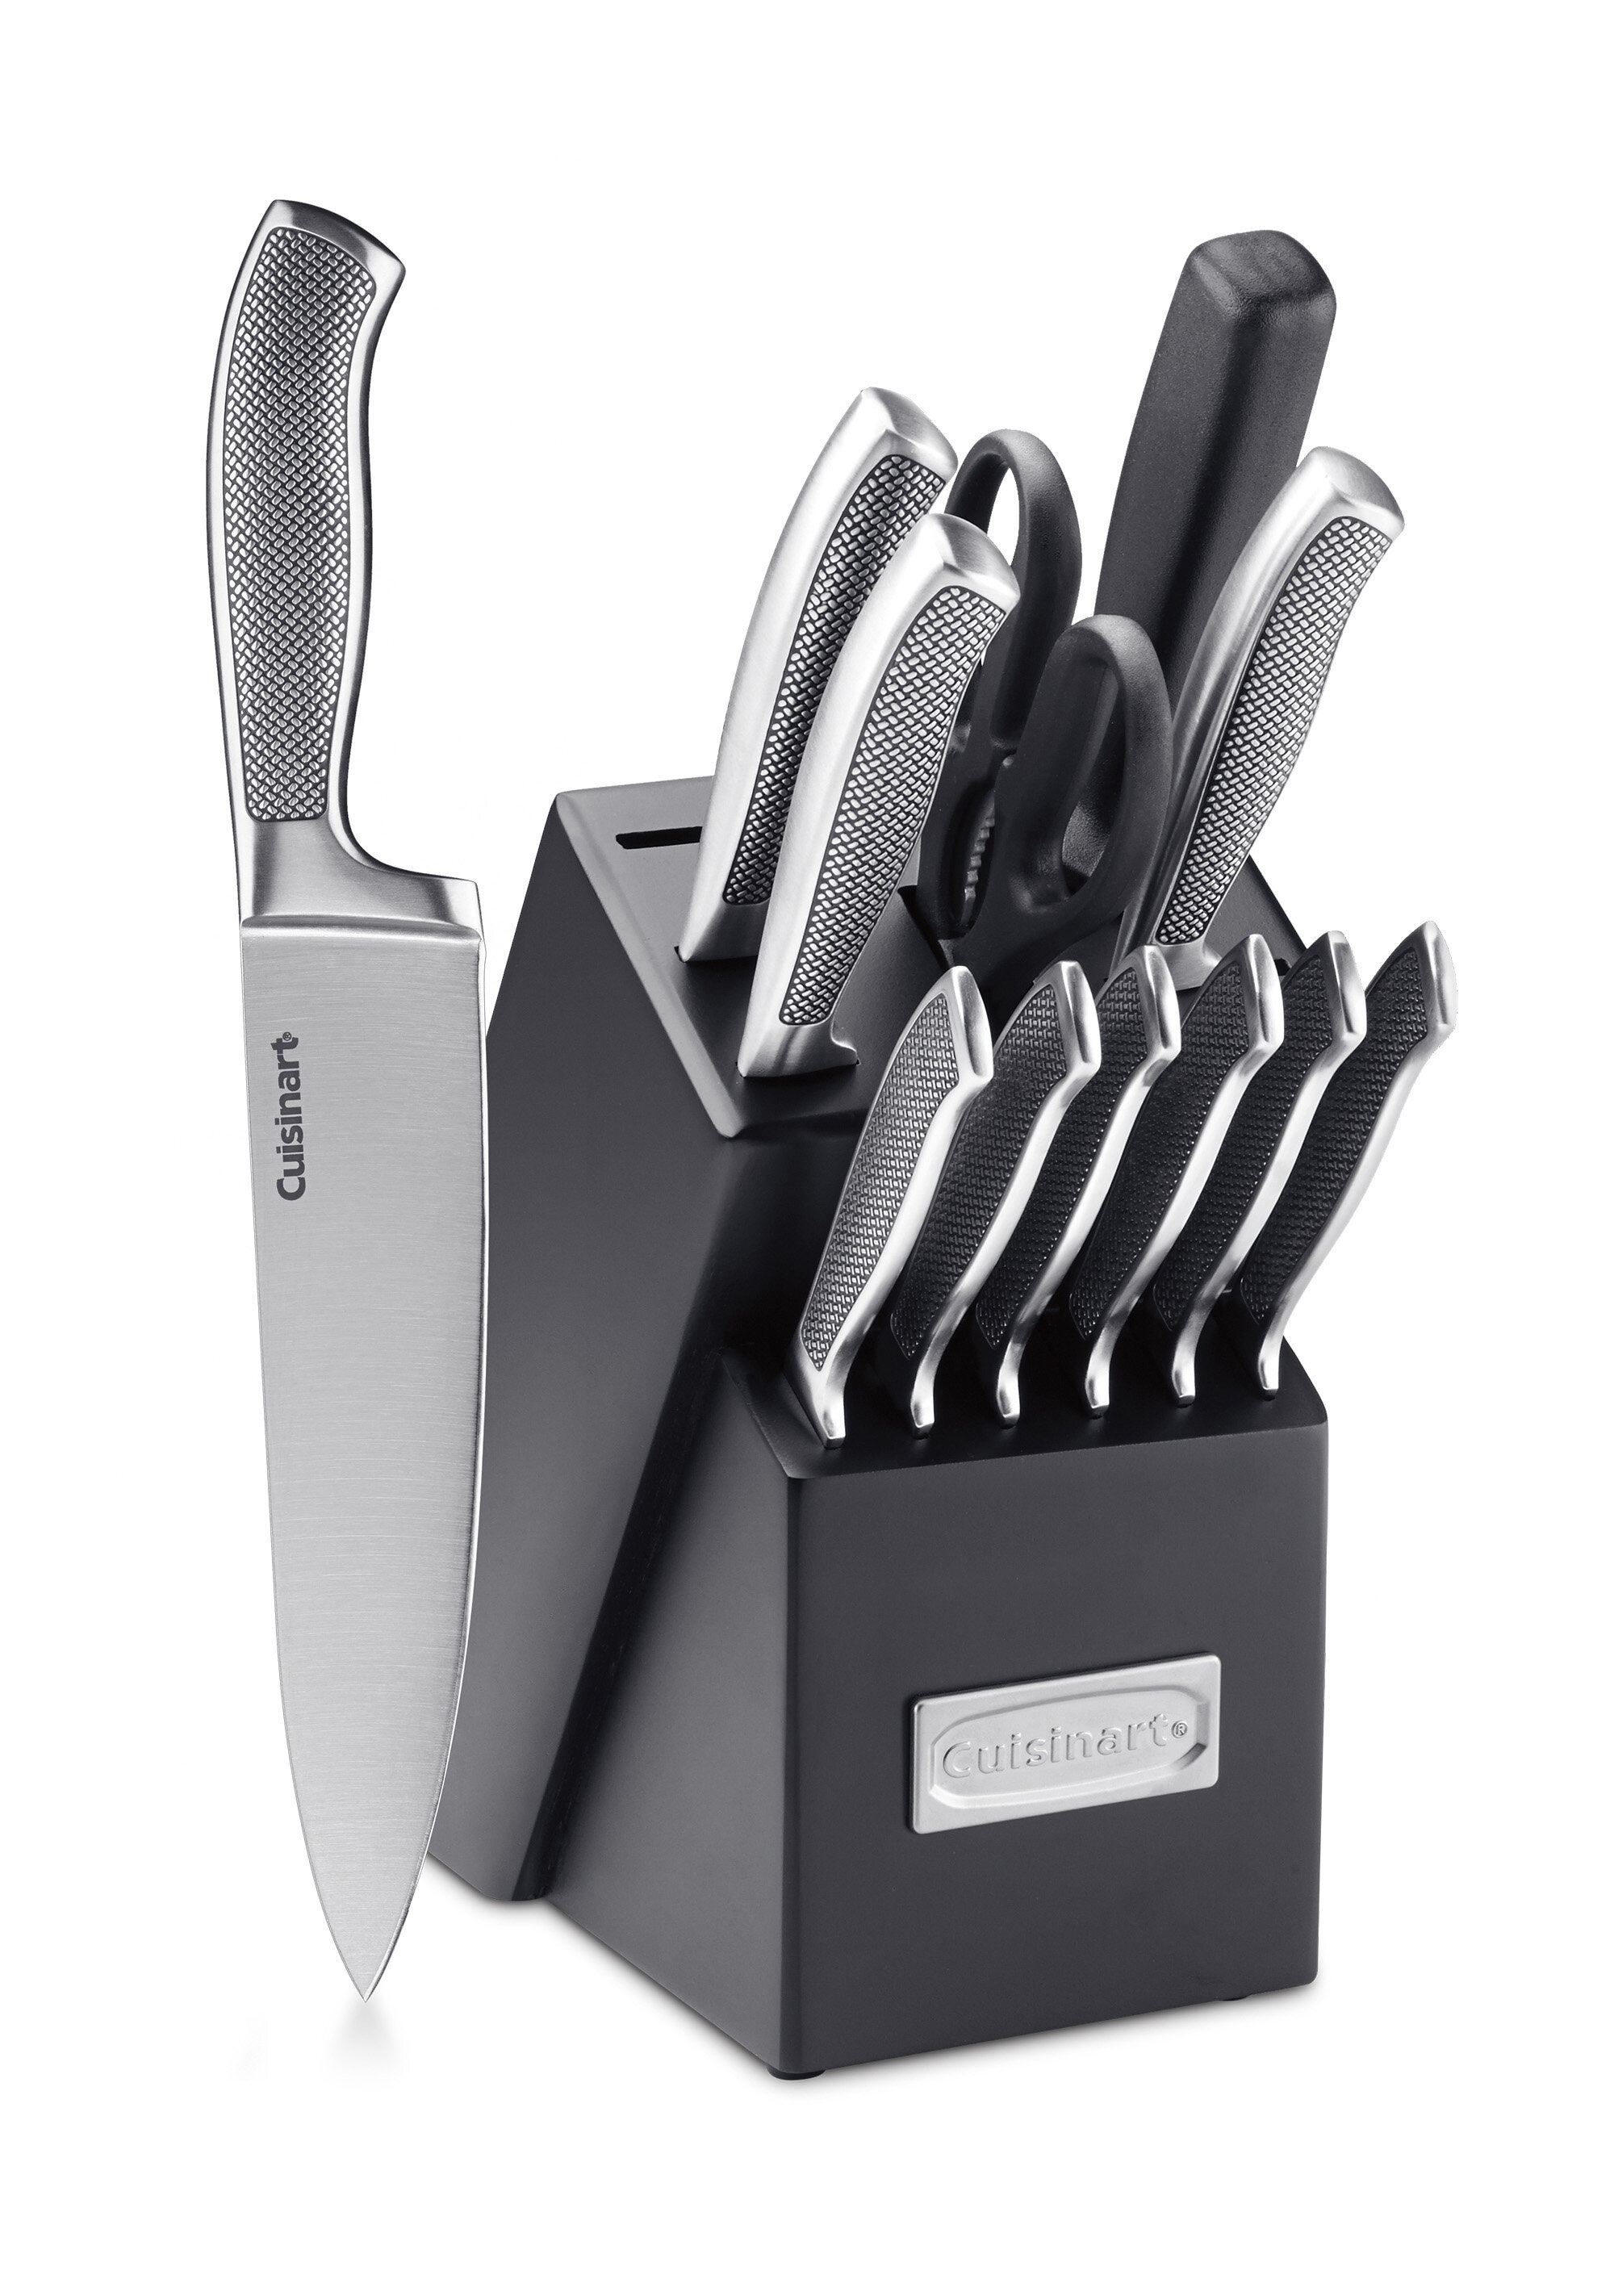 Farberware Professional 3-Piece Forged Textured Stainless Steel Knife Set, Size: Parer